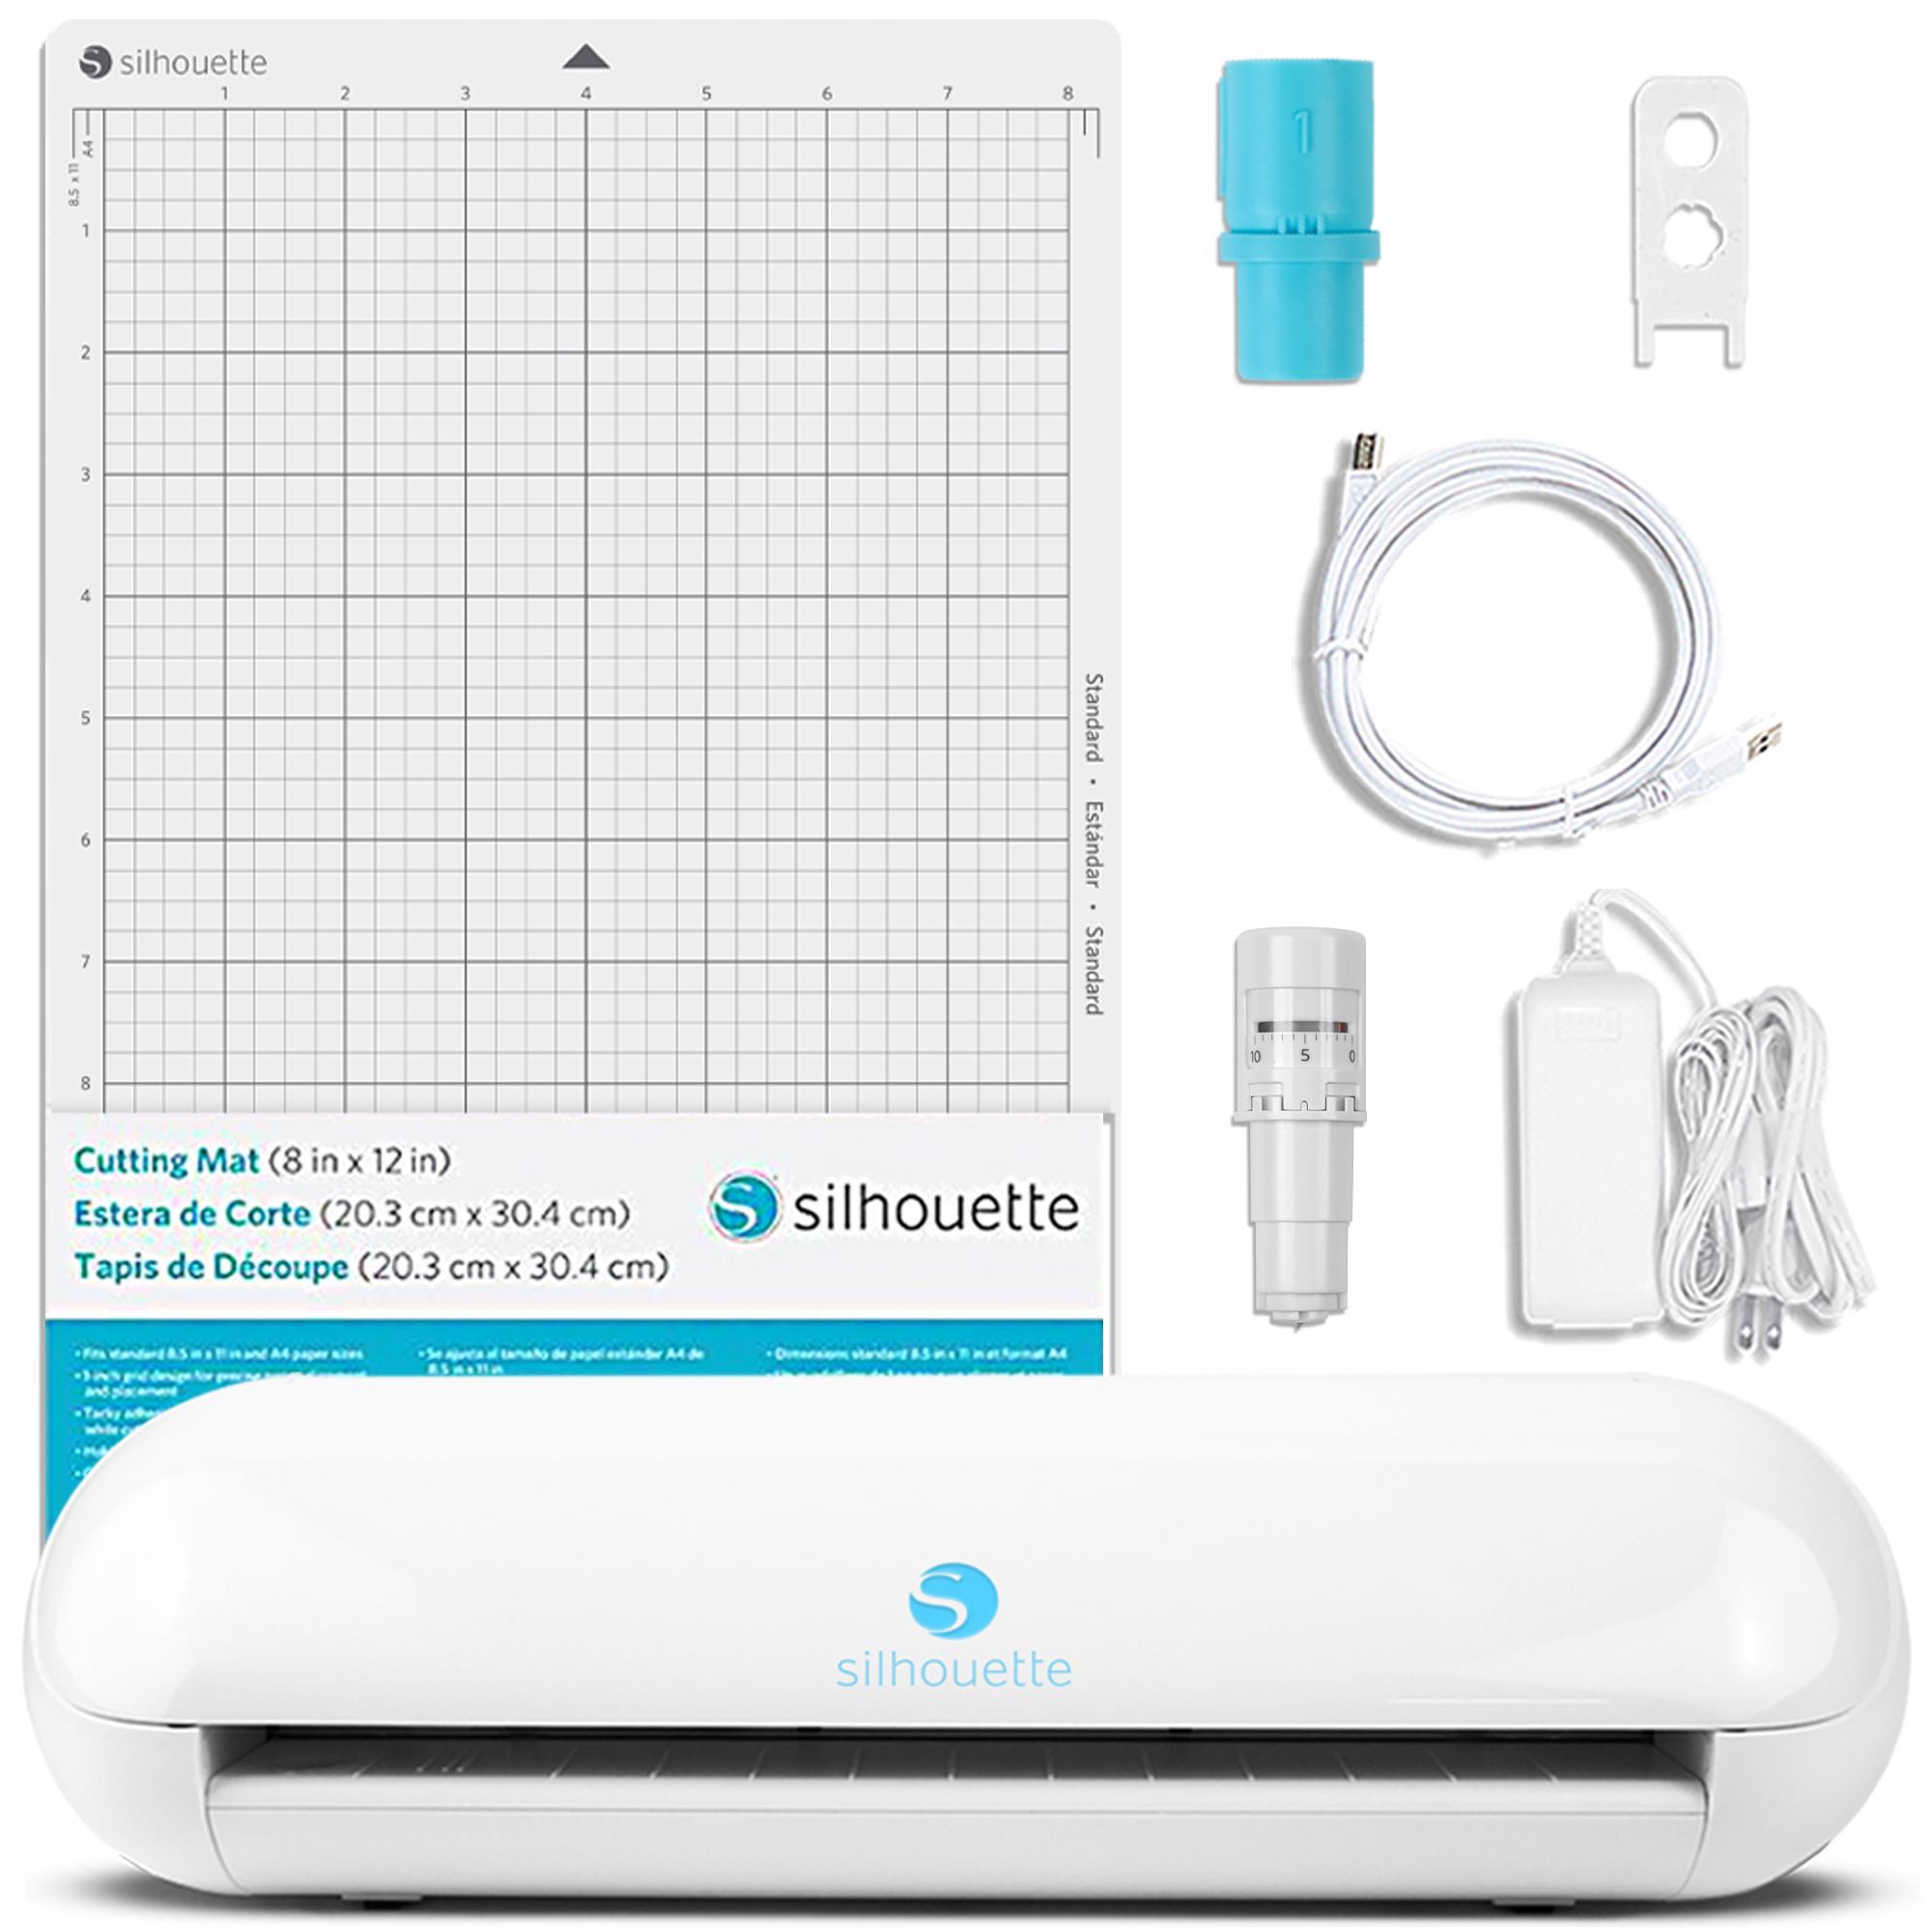 Silhouette White Cameo 4 Starter Bundle with 38 Oracal Vinyl